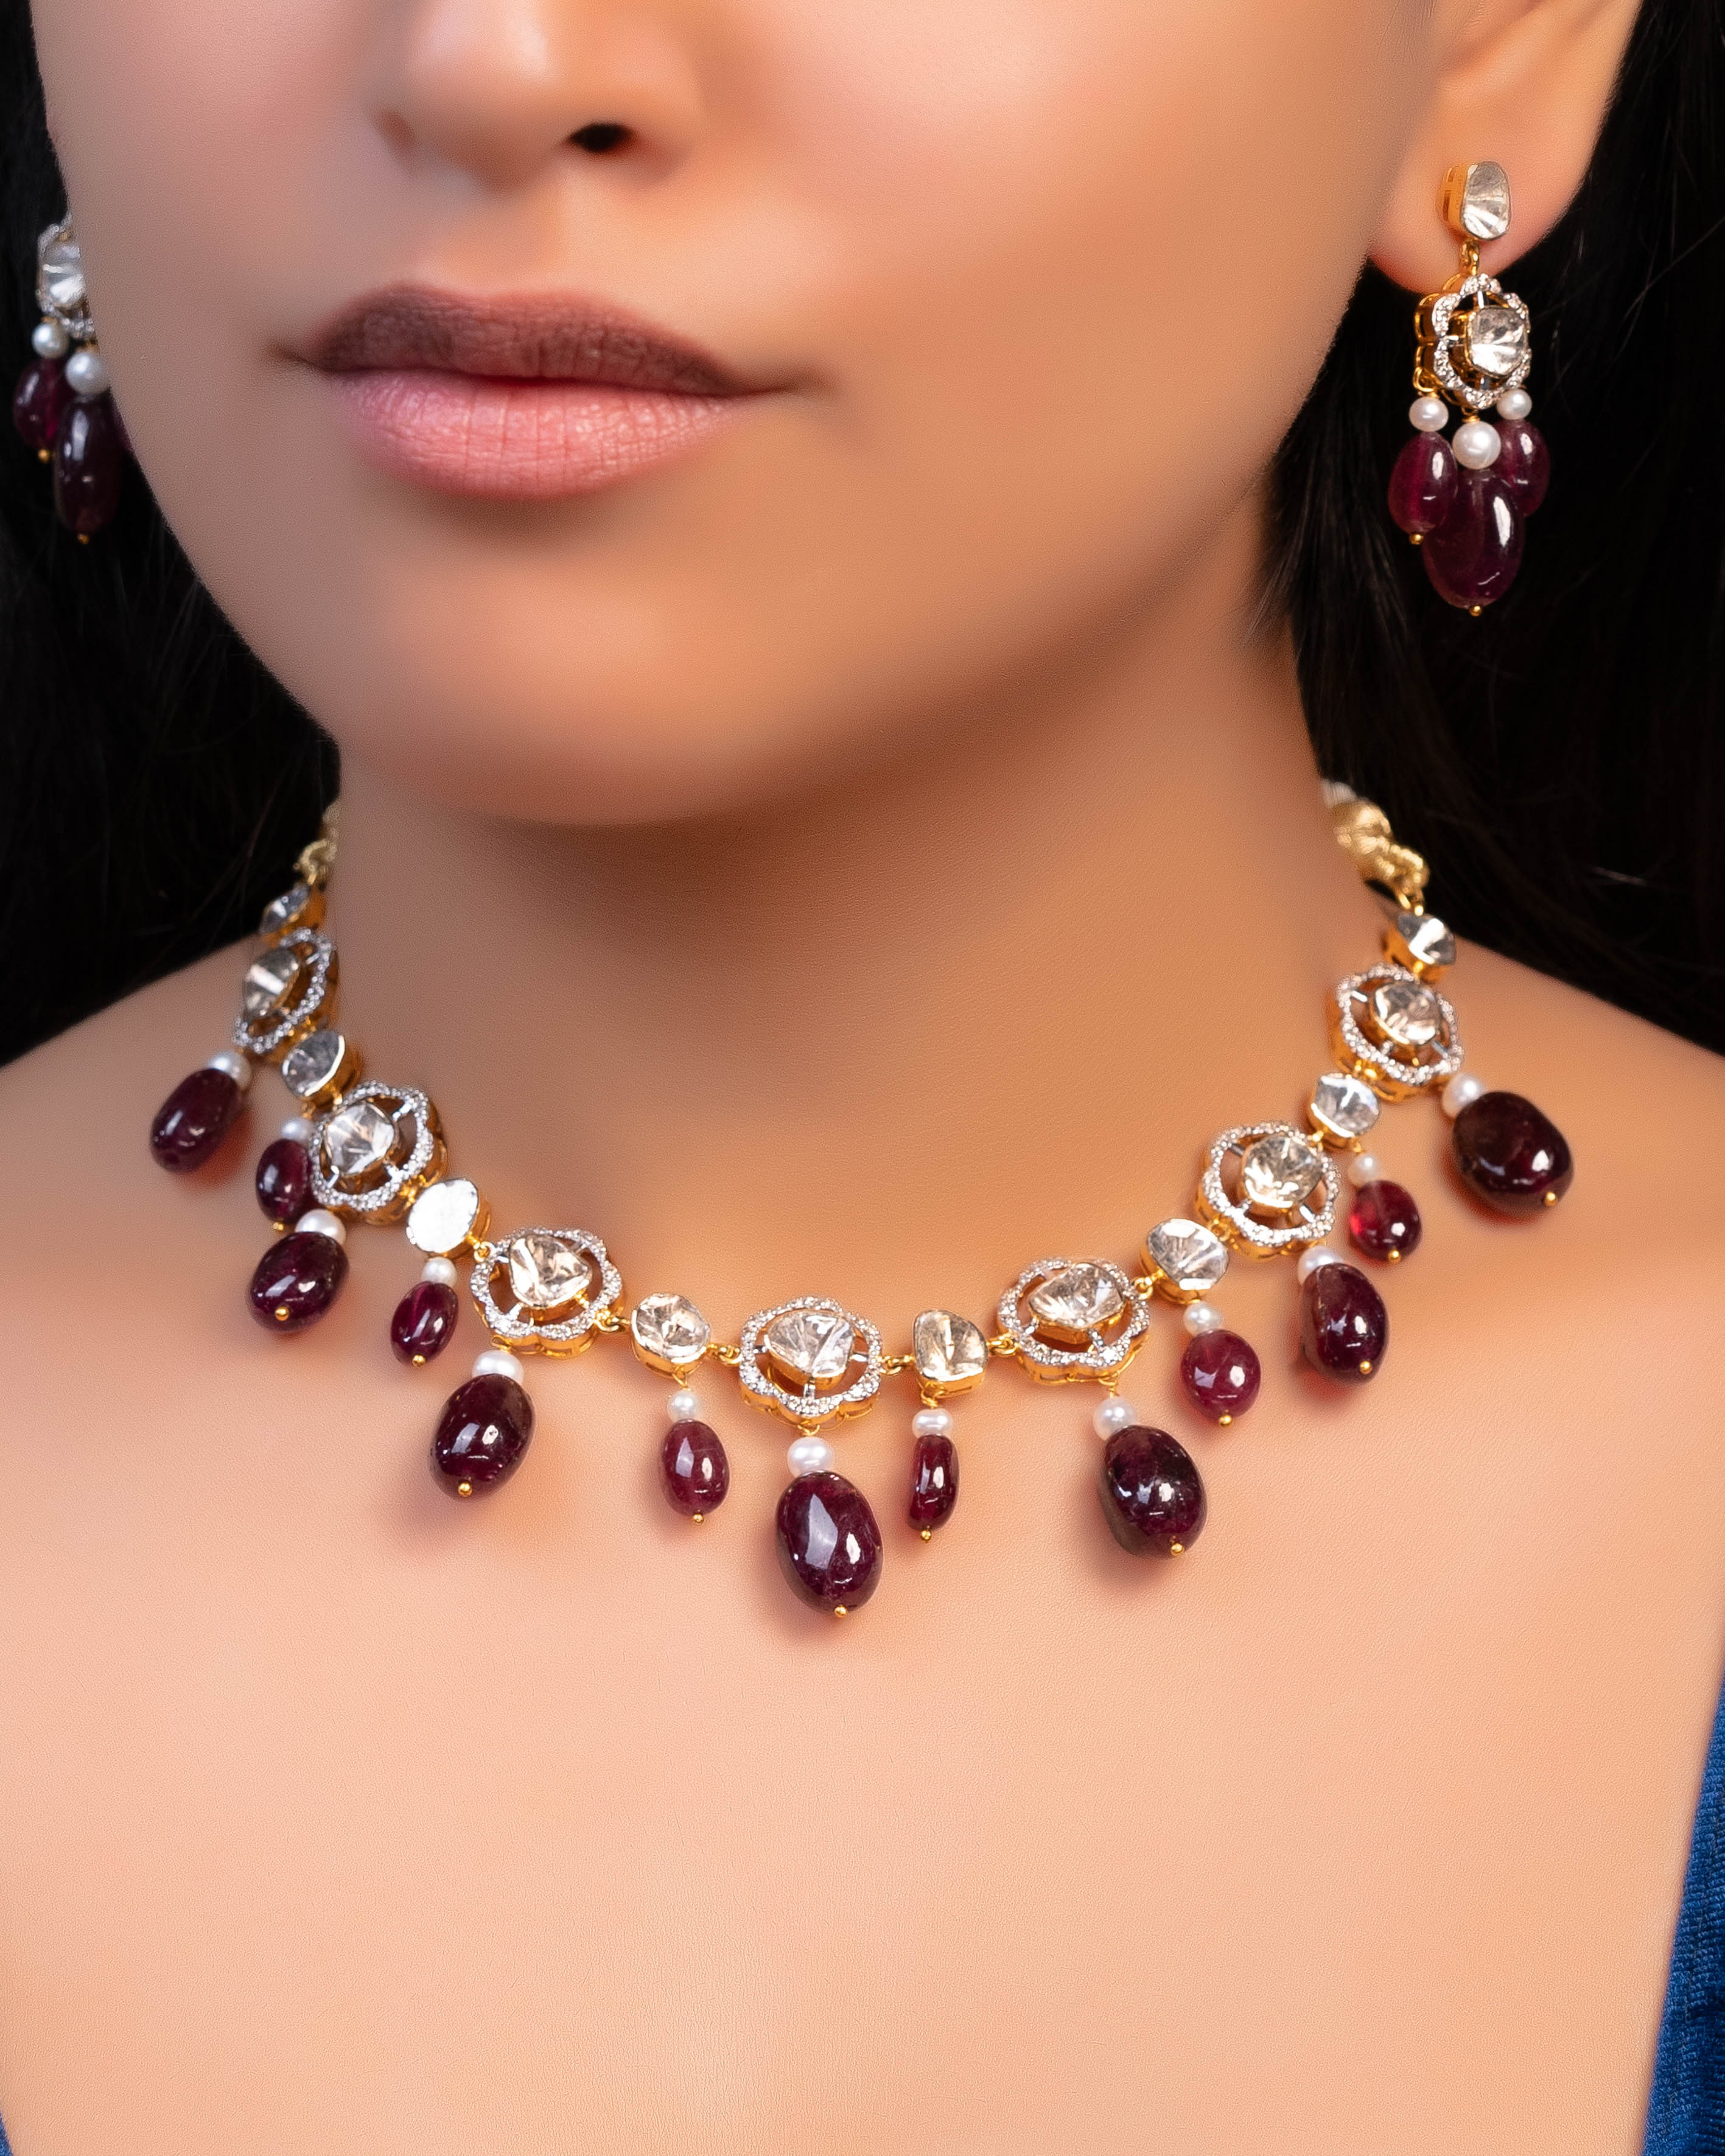 Dangler earrings maroon and cz stone with pearl hangings – Cherrypick